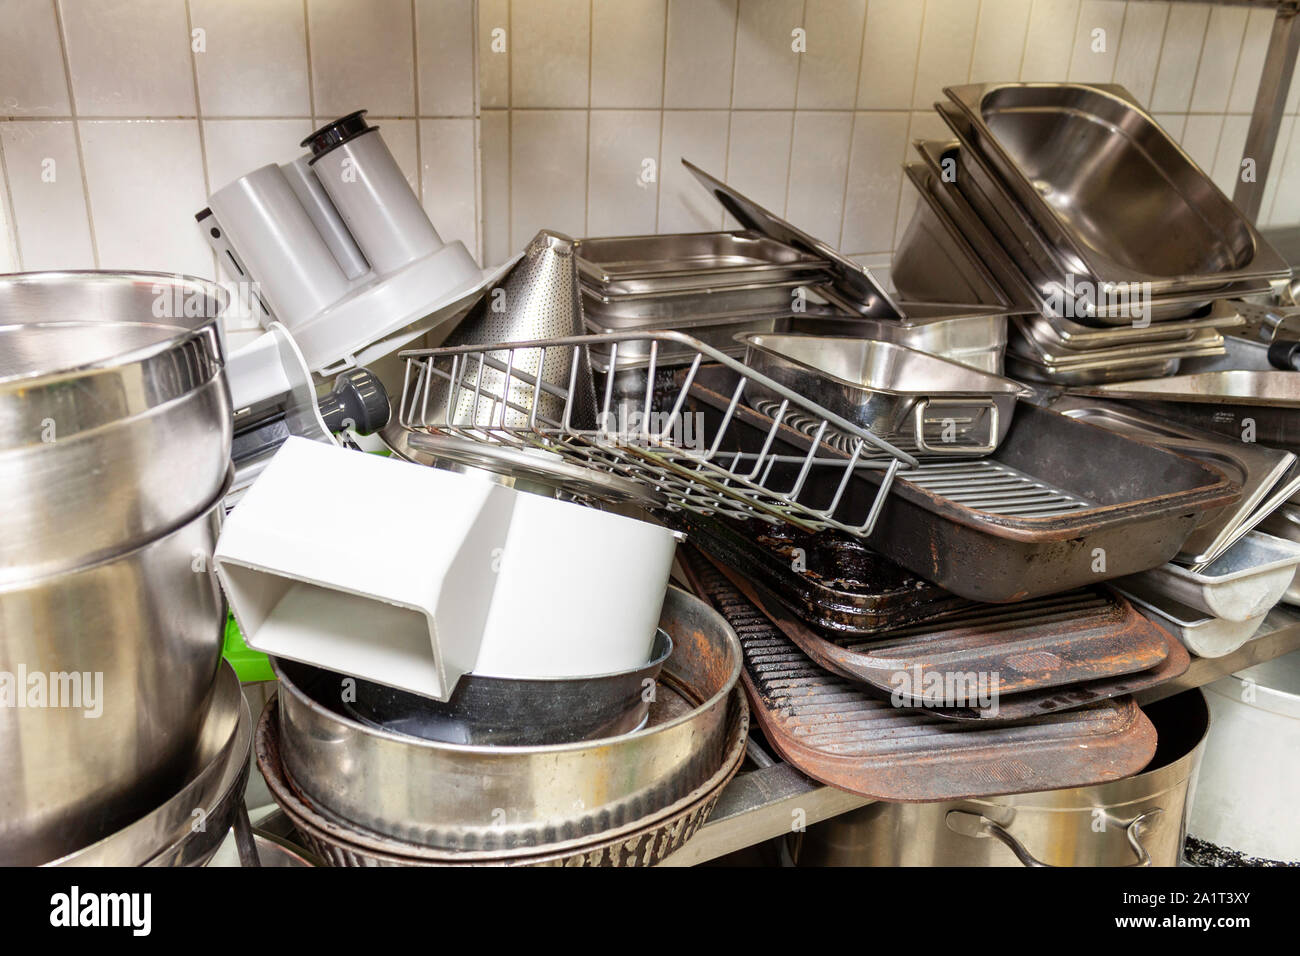 Stack of old baking trays and warming pots in an industrial kitchen Stock Photo